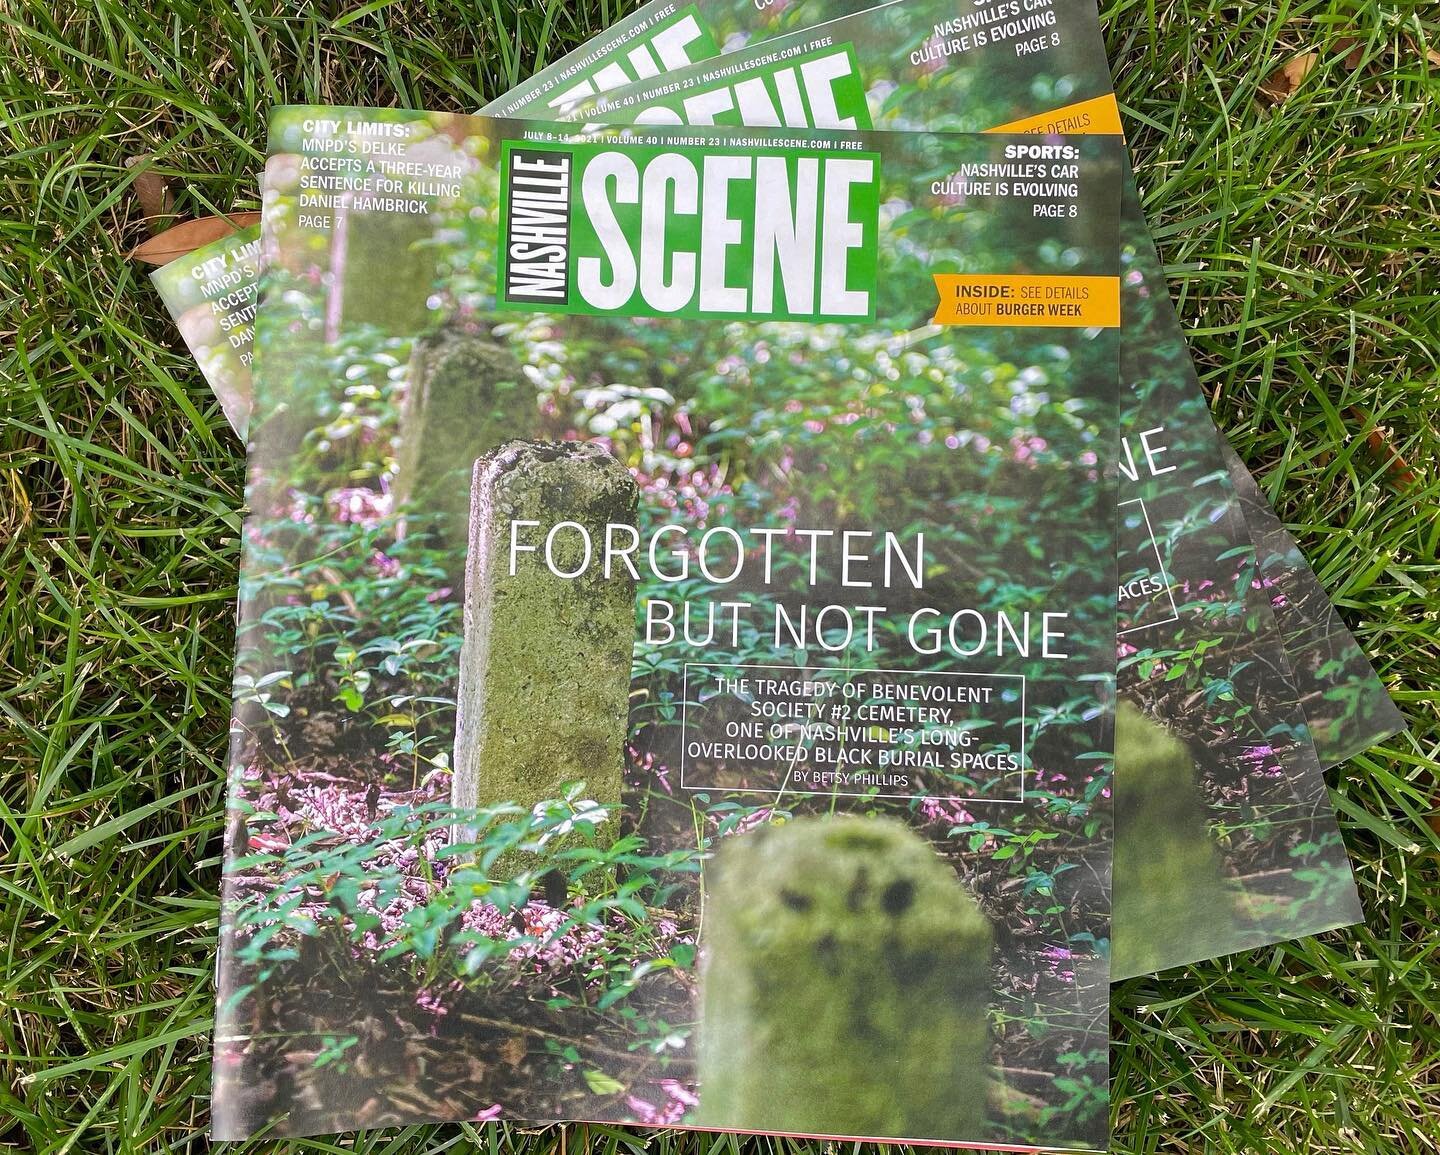 Forgotten but Not Gone: The Tragedy of Benevolent Society #2 Cemetery. In this week&rsquo;s issue, Betsy Phillips explores the history of one of Nashville&rsquo;s long-overlooked Black burial spaces. Link in bio. 📸: @escene